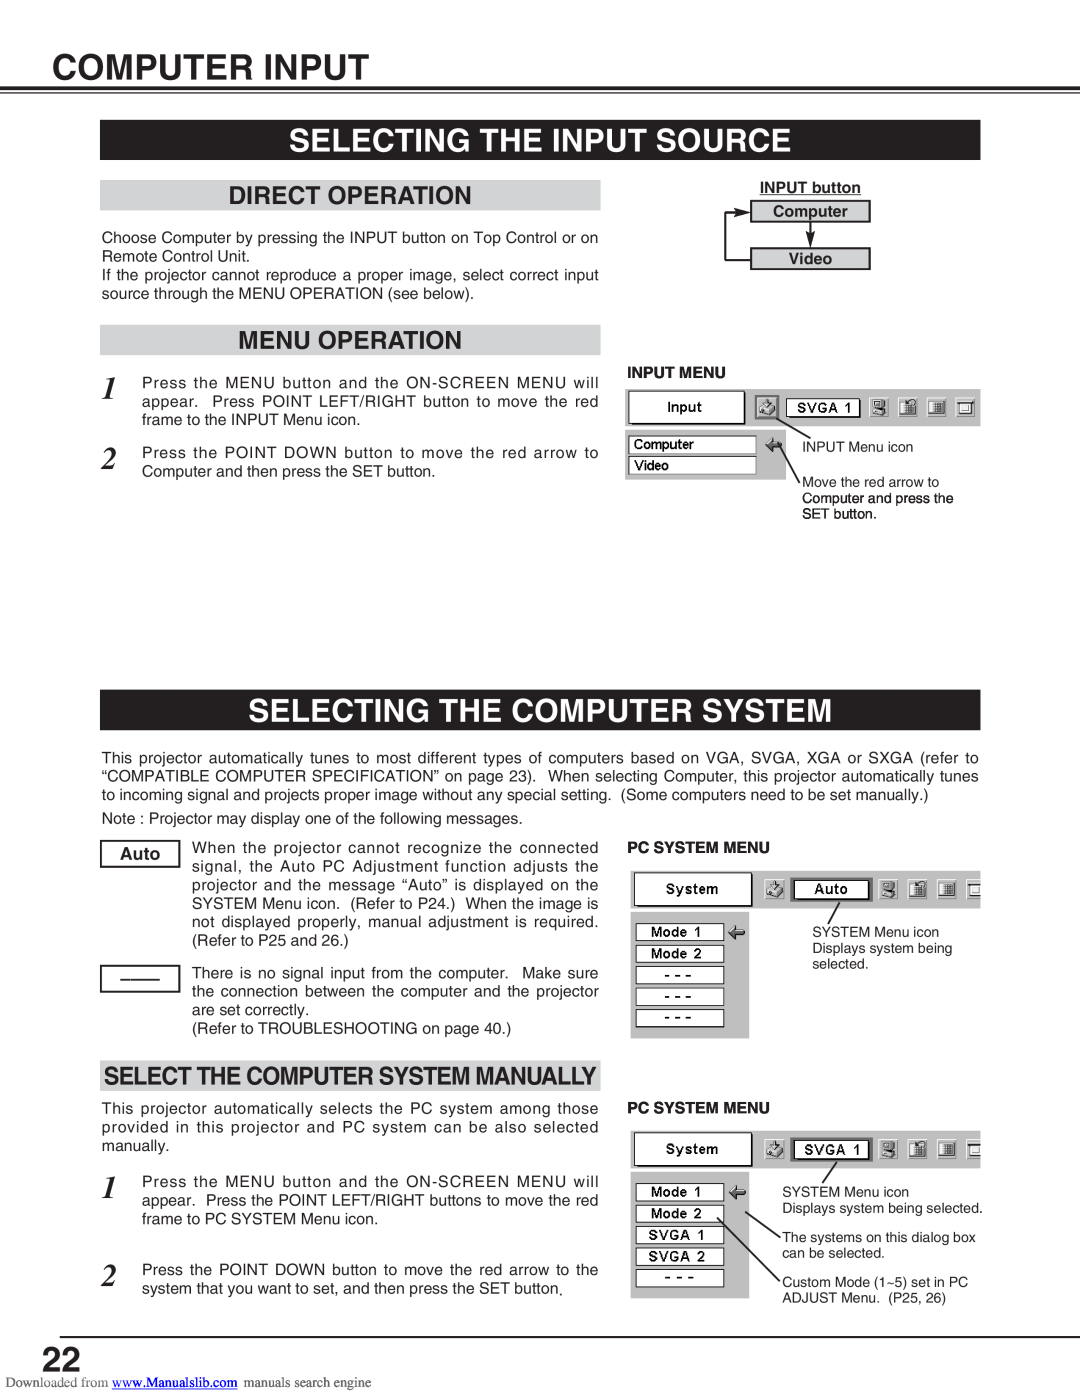 Canon LV-S2 Computer Input, Selecting The Input Source, Selecting The Computer System, Select The Computer System Manually 